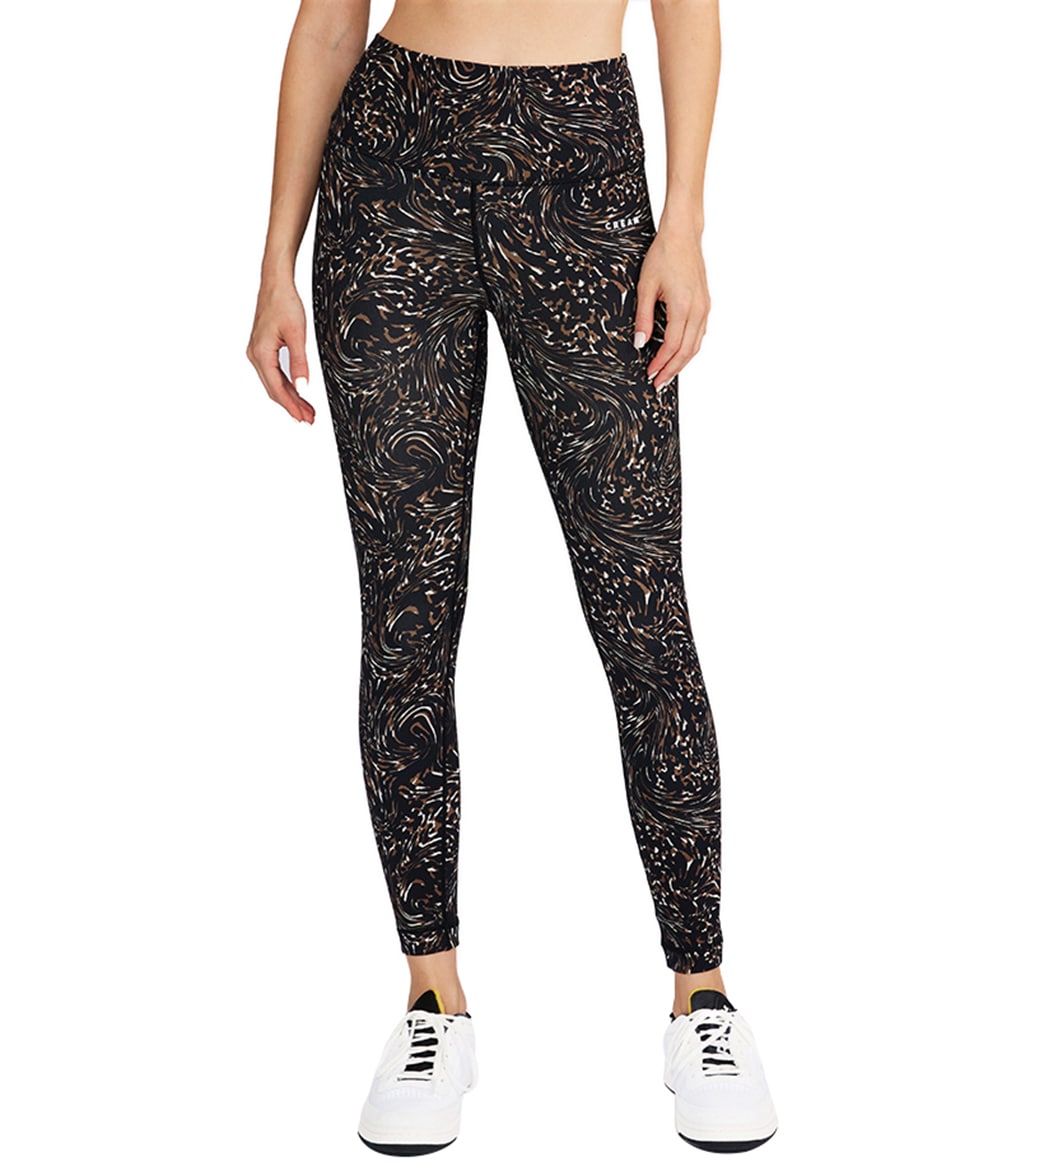 Onzie high waisted yoga 7/8 leggings in floral leopard